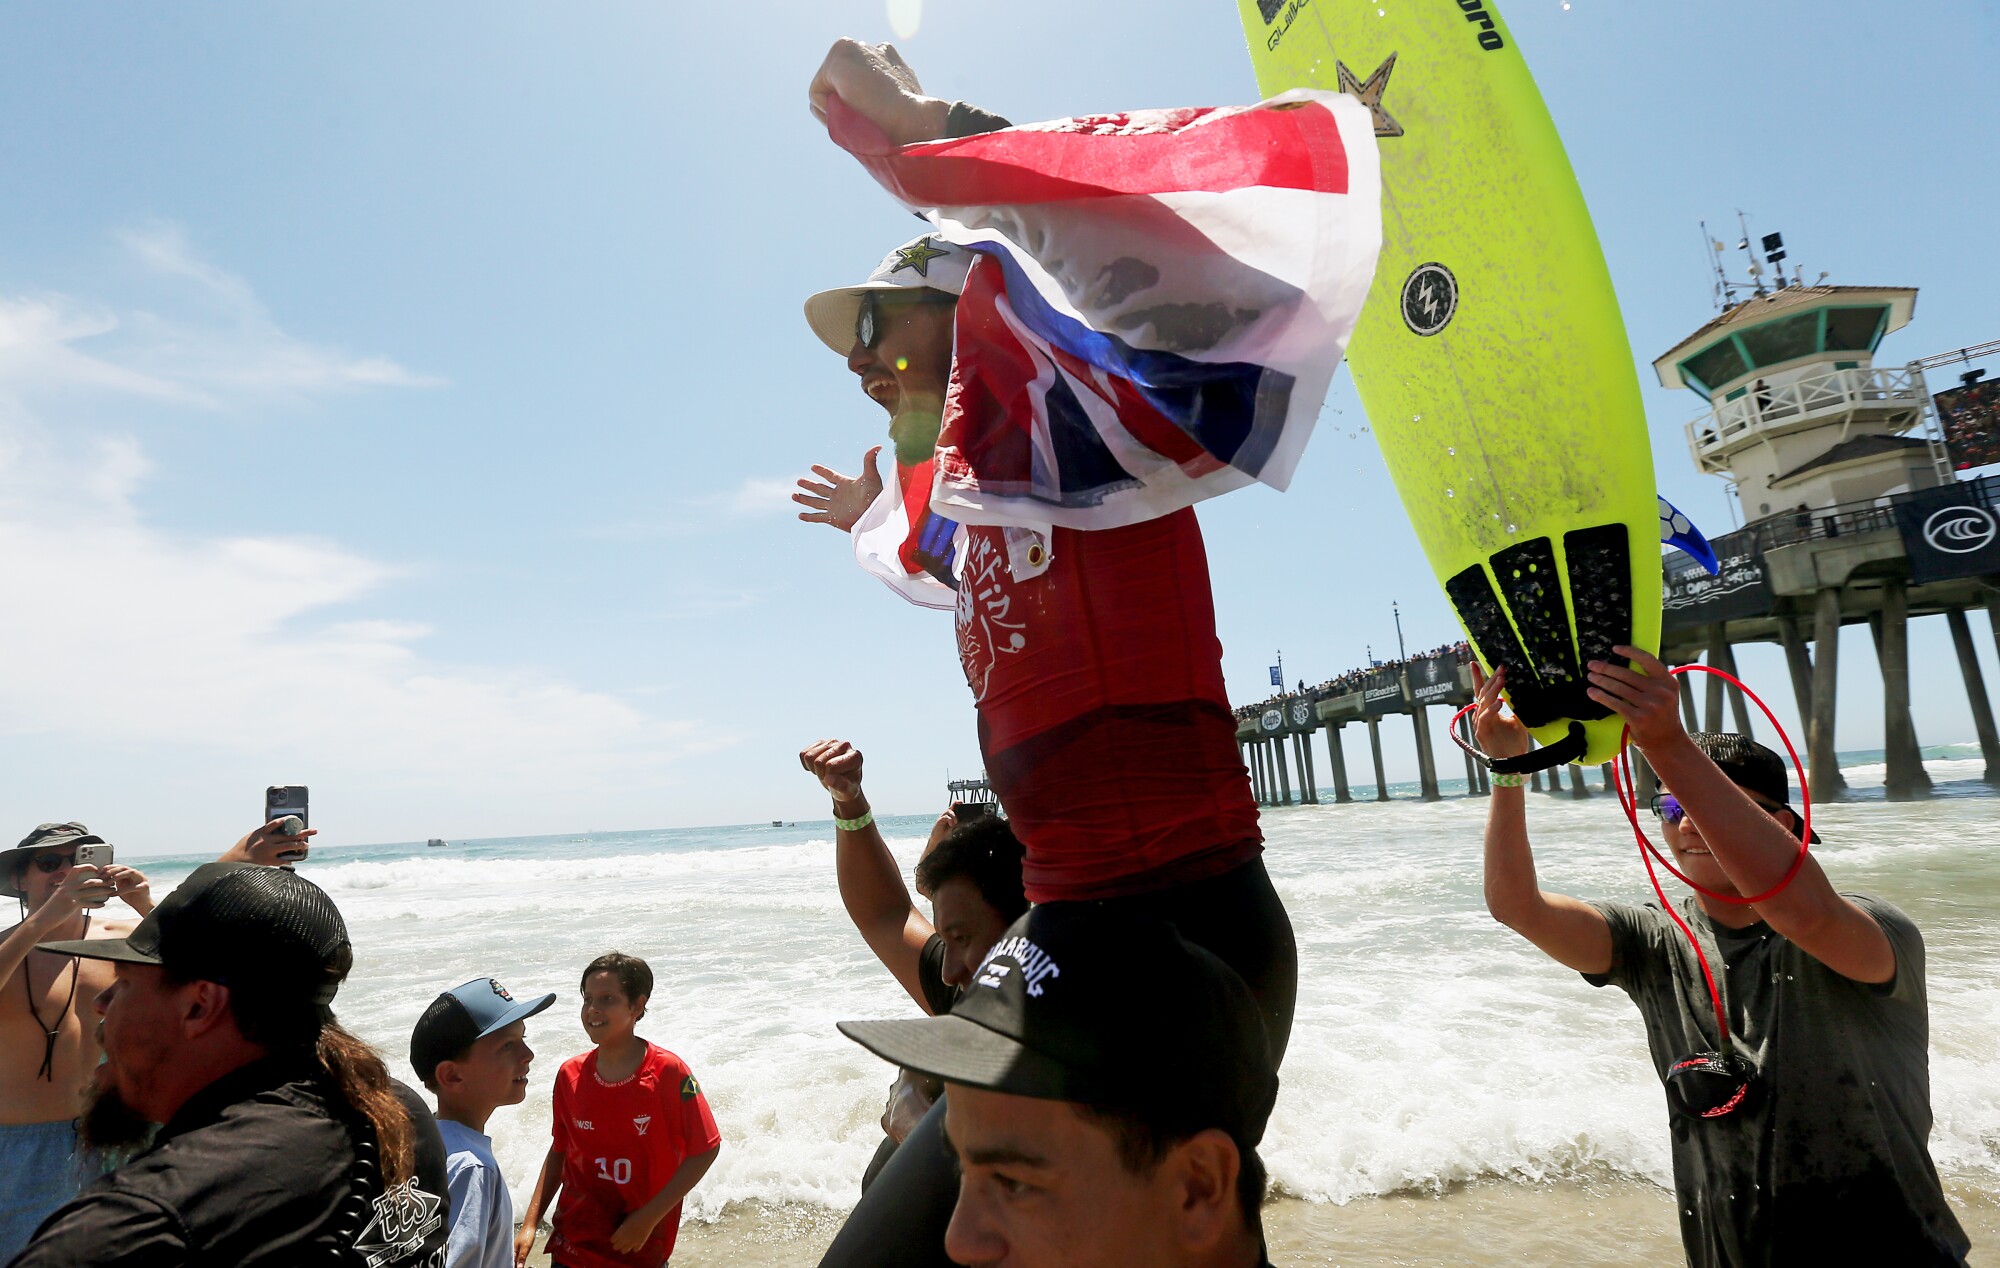 Ezekial Lau is hoisted up by supporters after winning the U.S. Open of Surfing men's championship on Sunday.